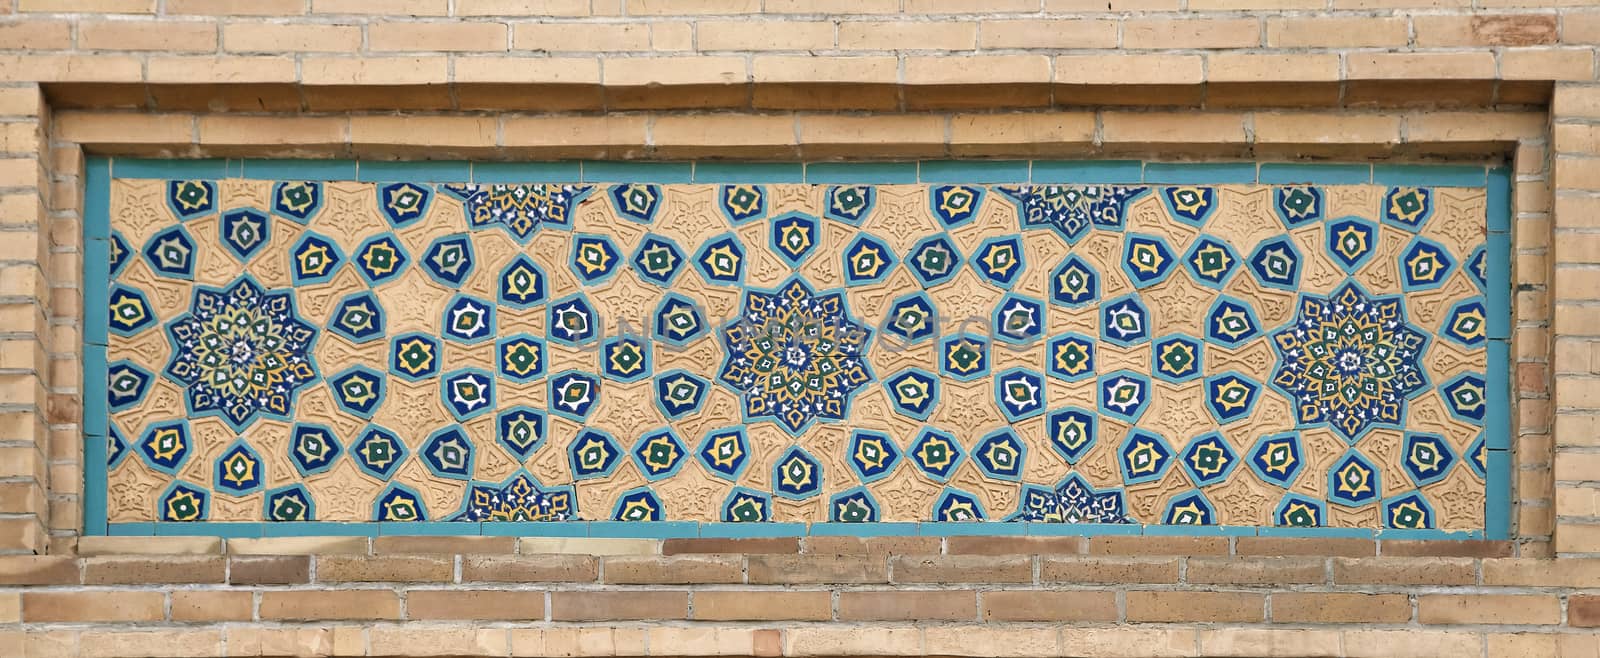 Old Eastern mosaic on the wall, Uzbekistan by Goodday